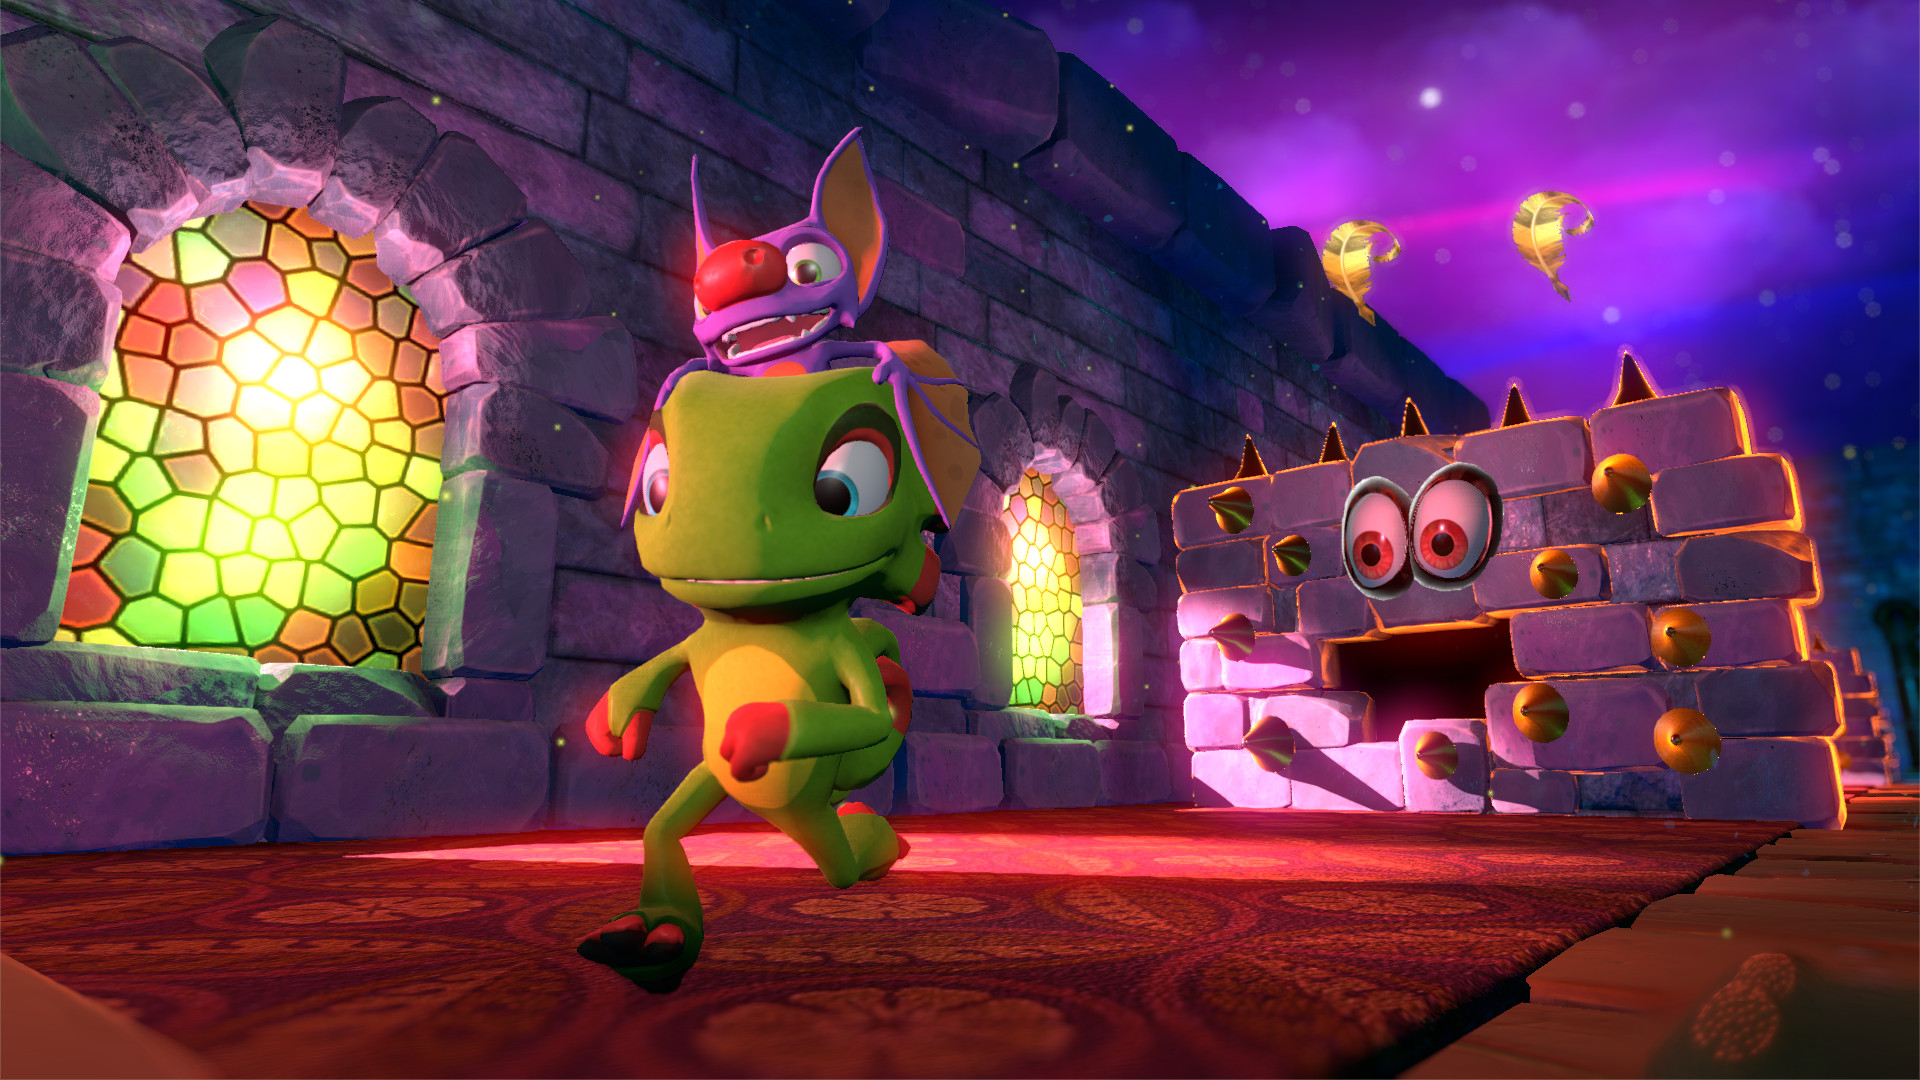 Yooka-Laylee Review - Rocket Chainsaw